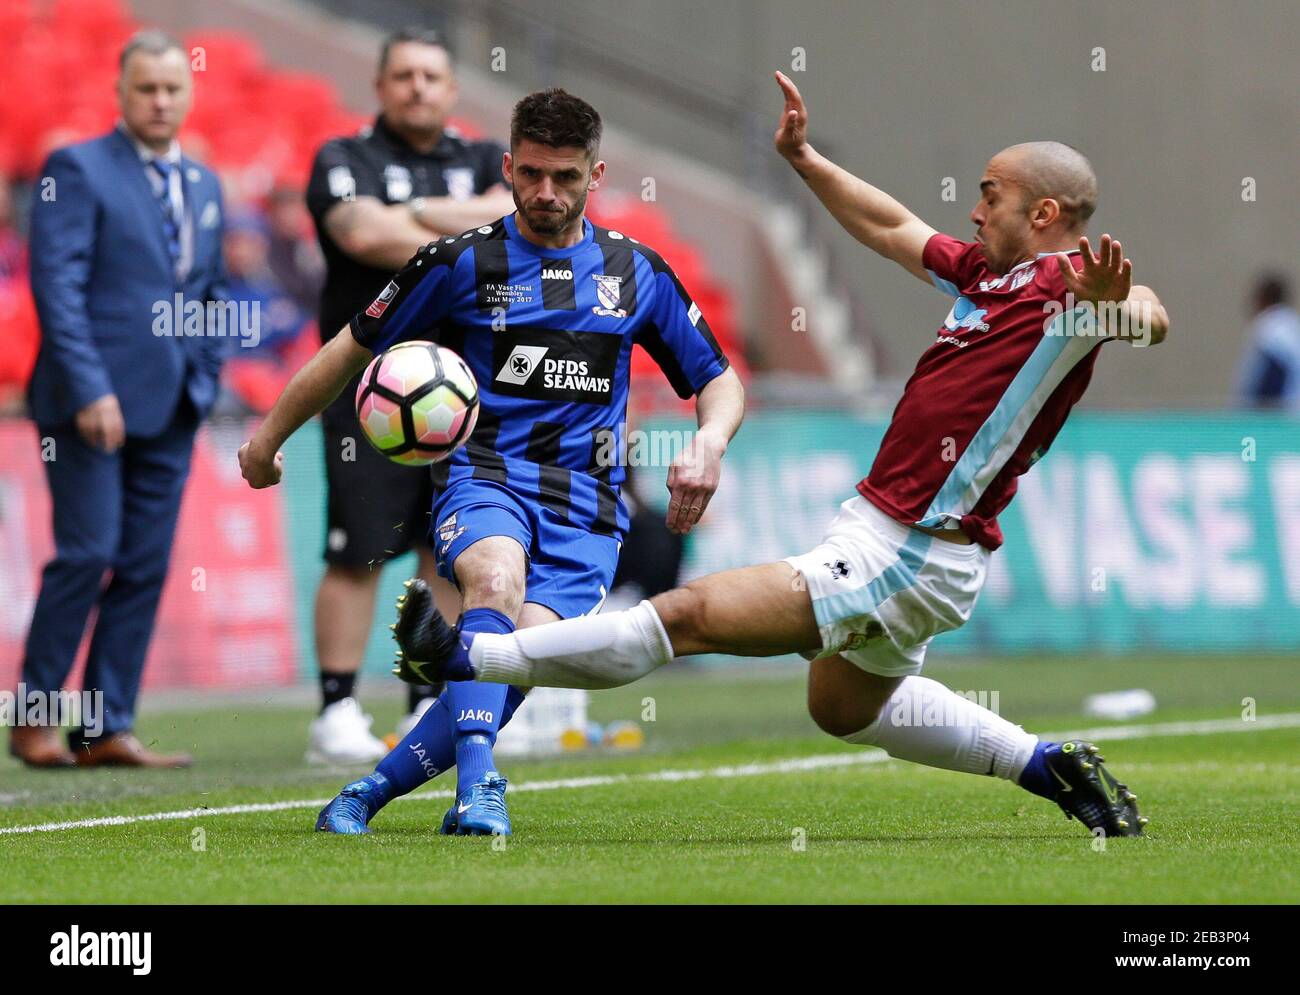 Britain Football Soccer - Cleethorpes Town v South Shields - FA Vase Final  - Wembley Stadium - 21/5/17 Liam Davis of Cleethorpes Town and Wayne  Phillips of South Shields in action Mandatory